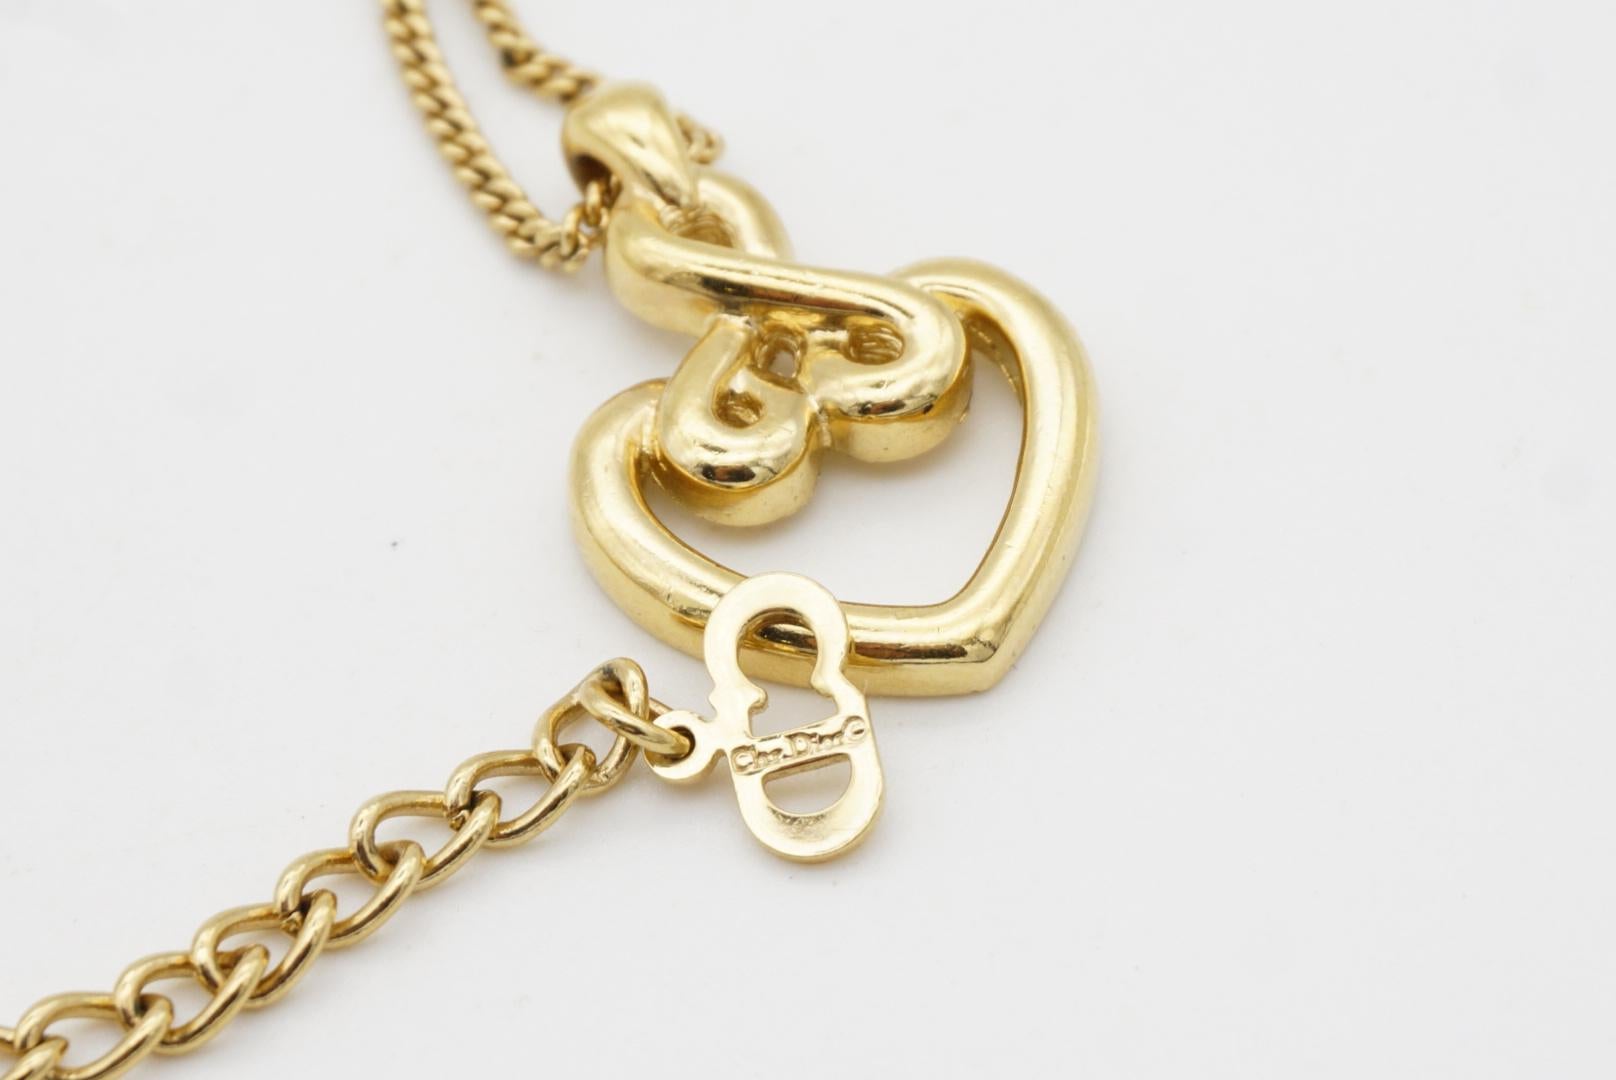 Christian Dior Vintage 1990s Baroque Heart Love Knot Openwork Pendant Necklace For Sale 5